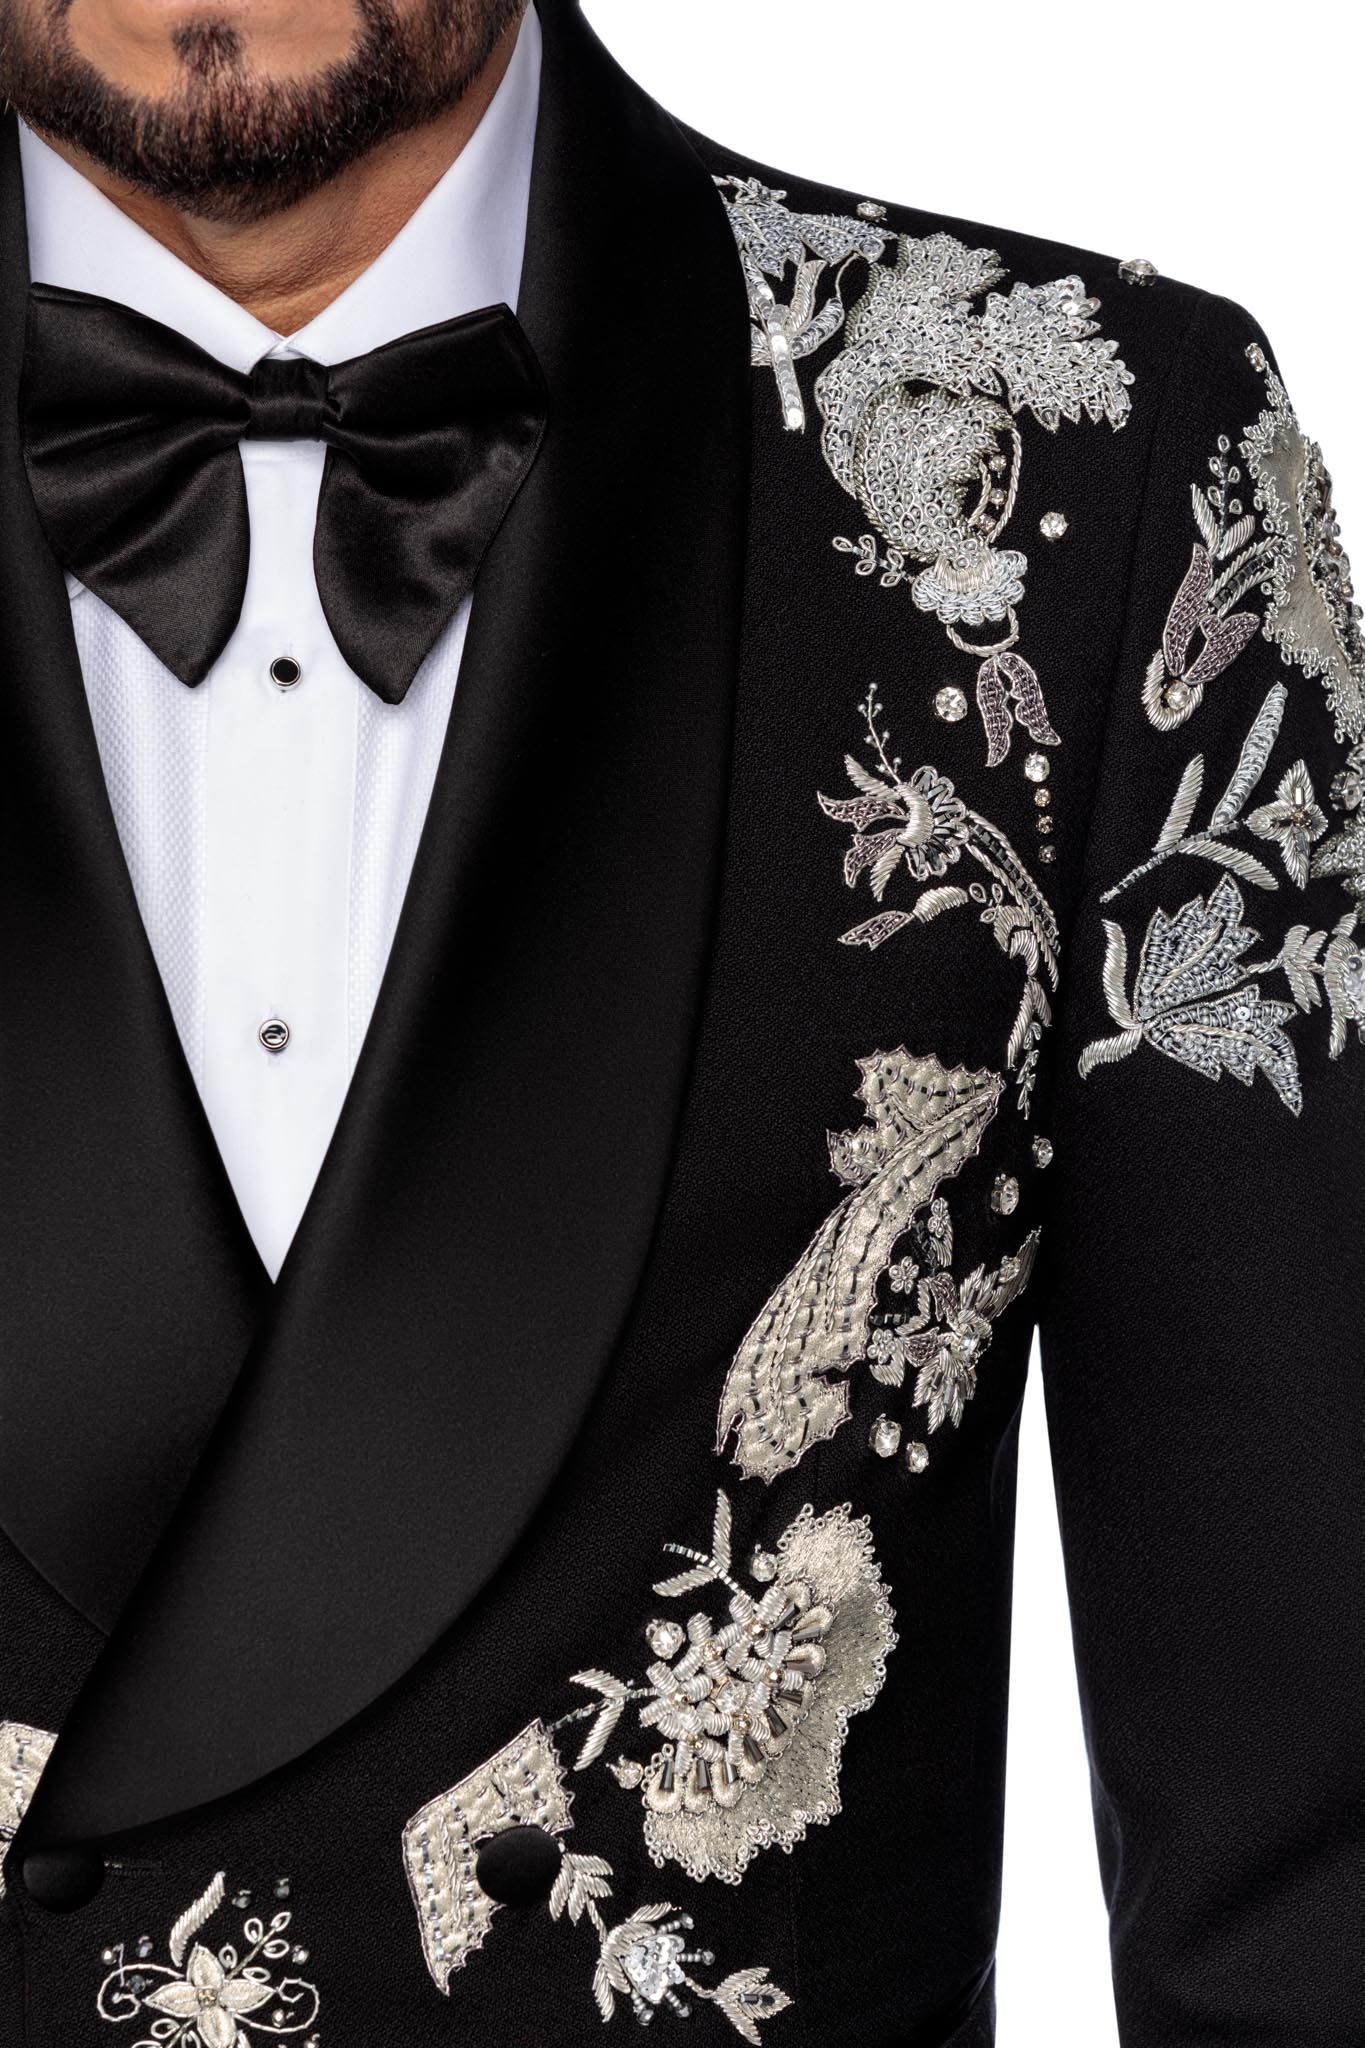 Tuxedo jacket with manual embroidery on two rows of buttons